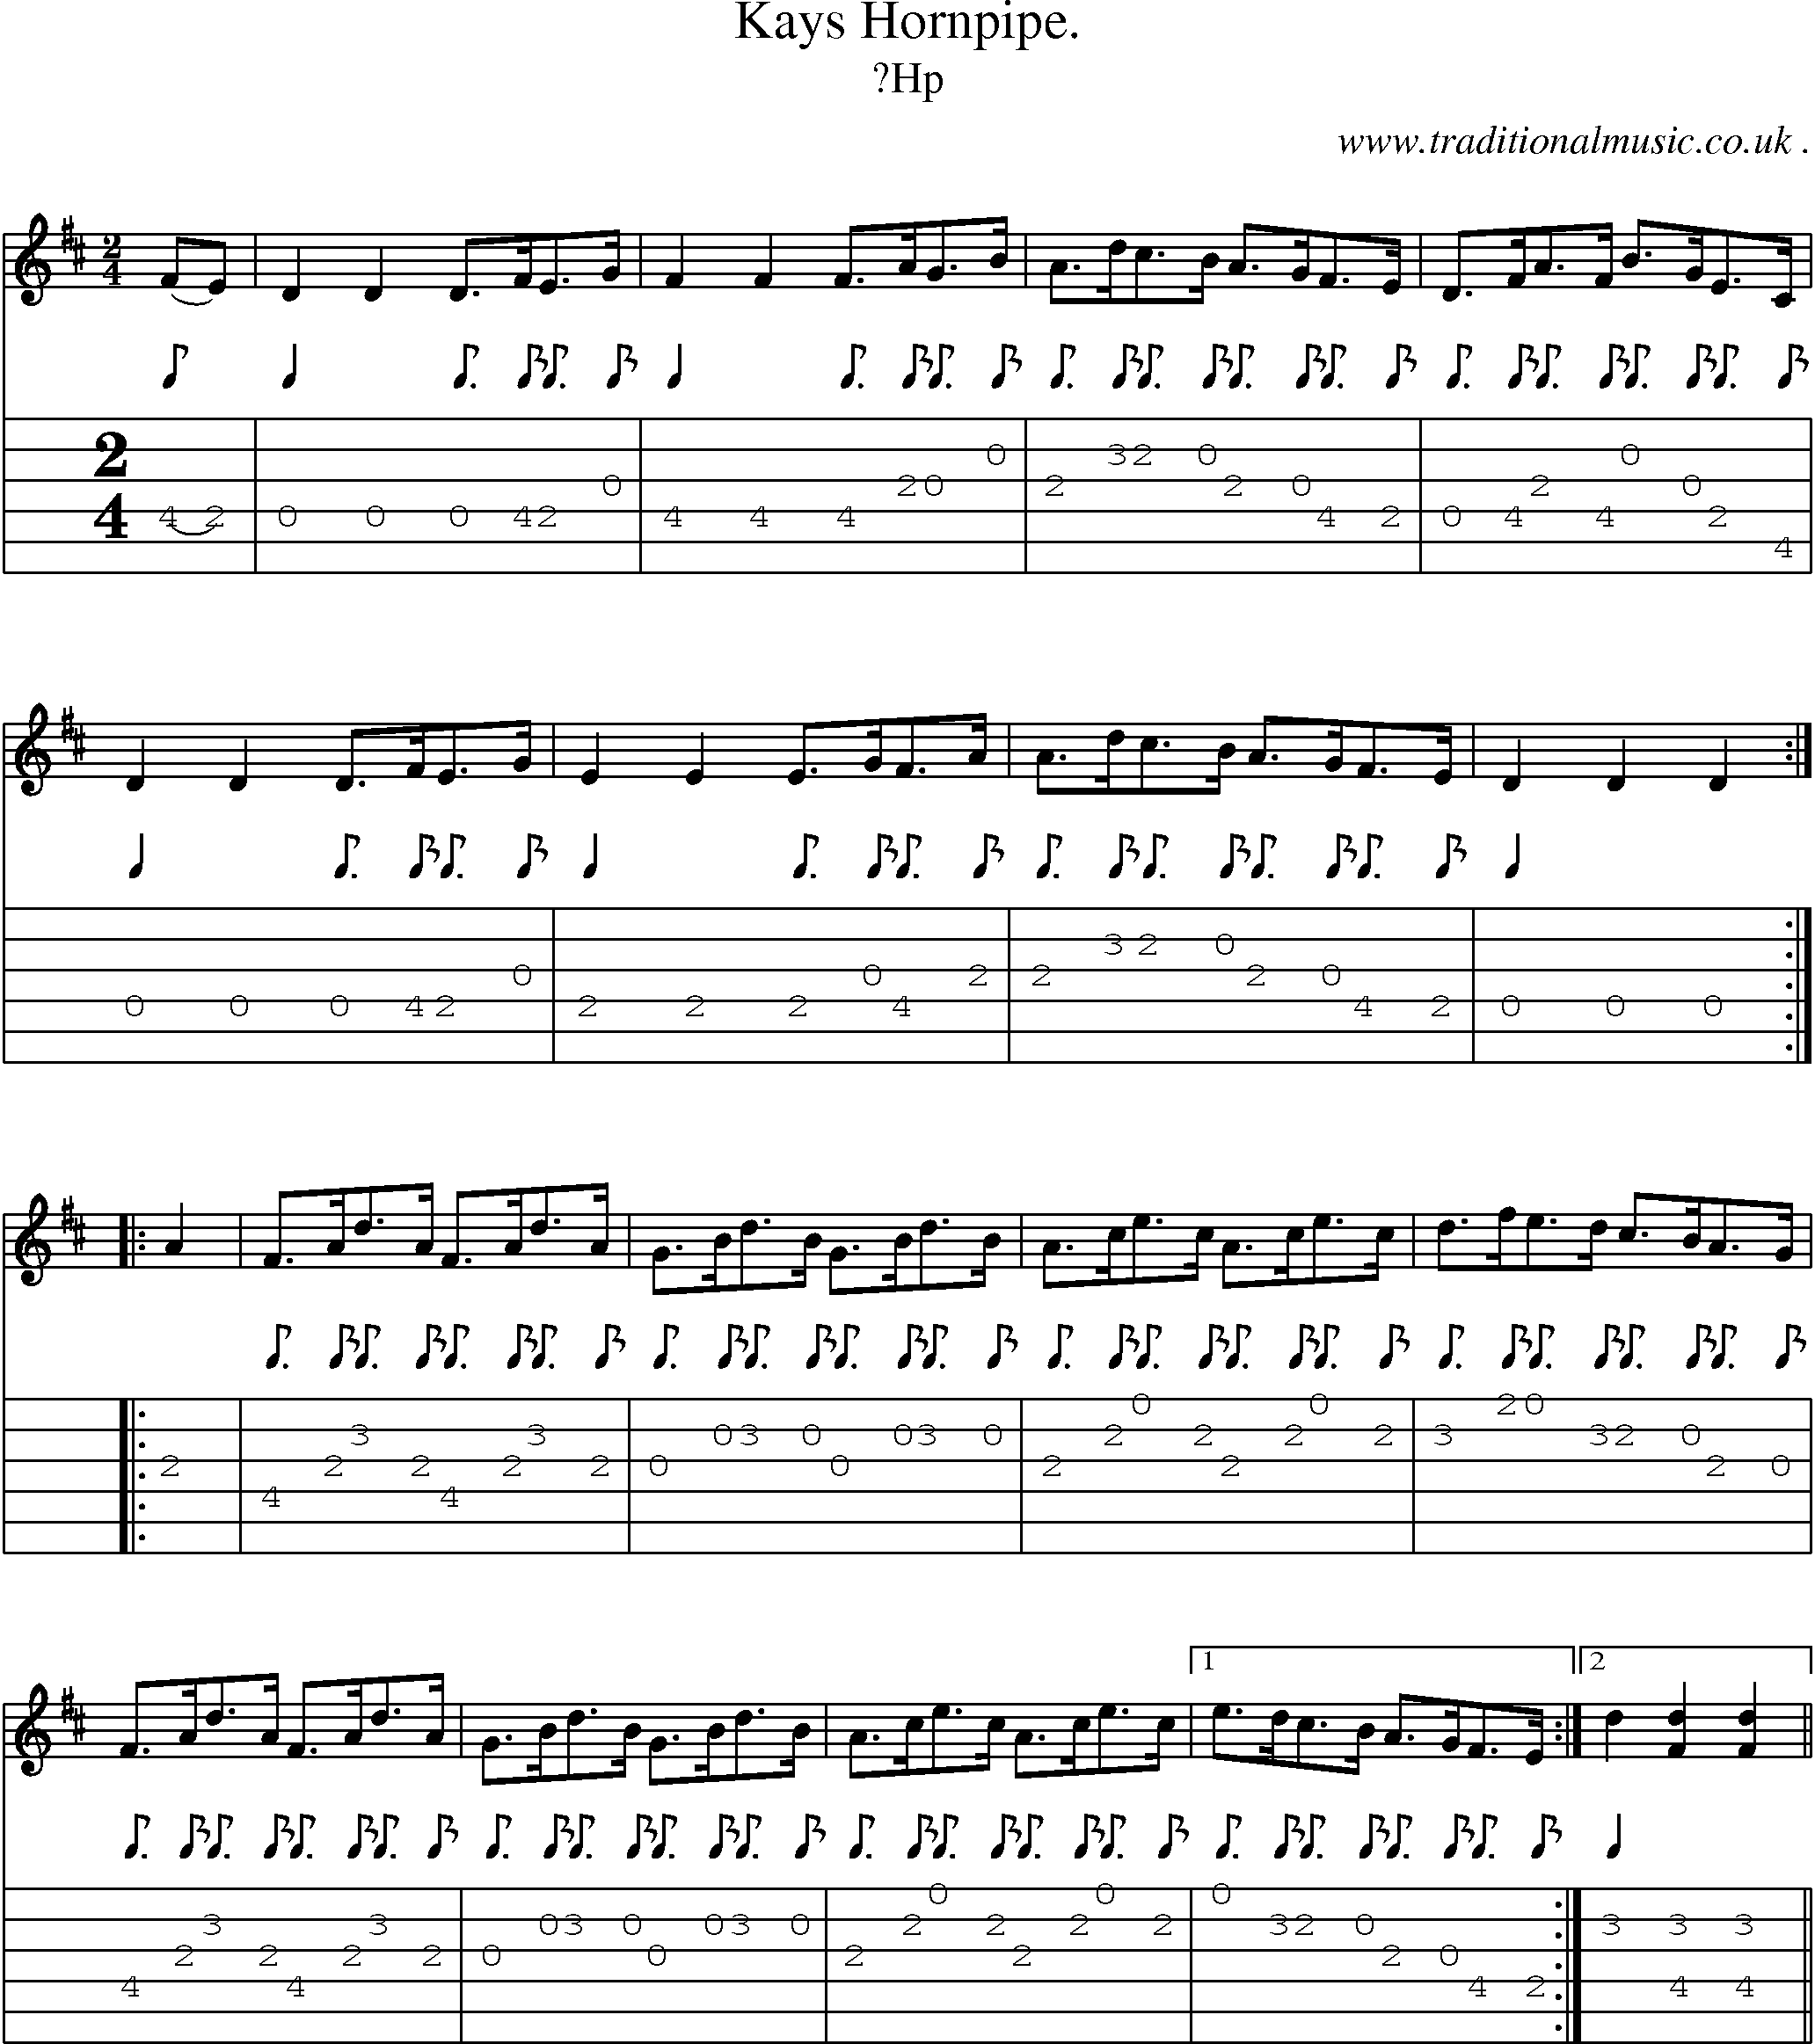 Sheet-Music and Guitar Tabs for Kays Hornpipe